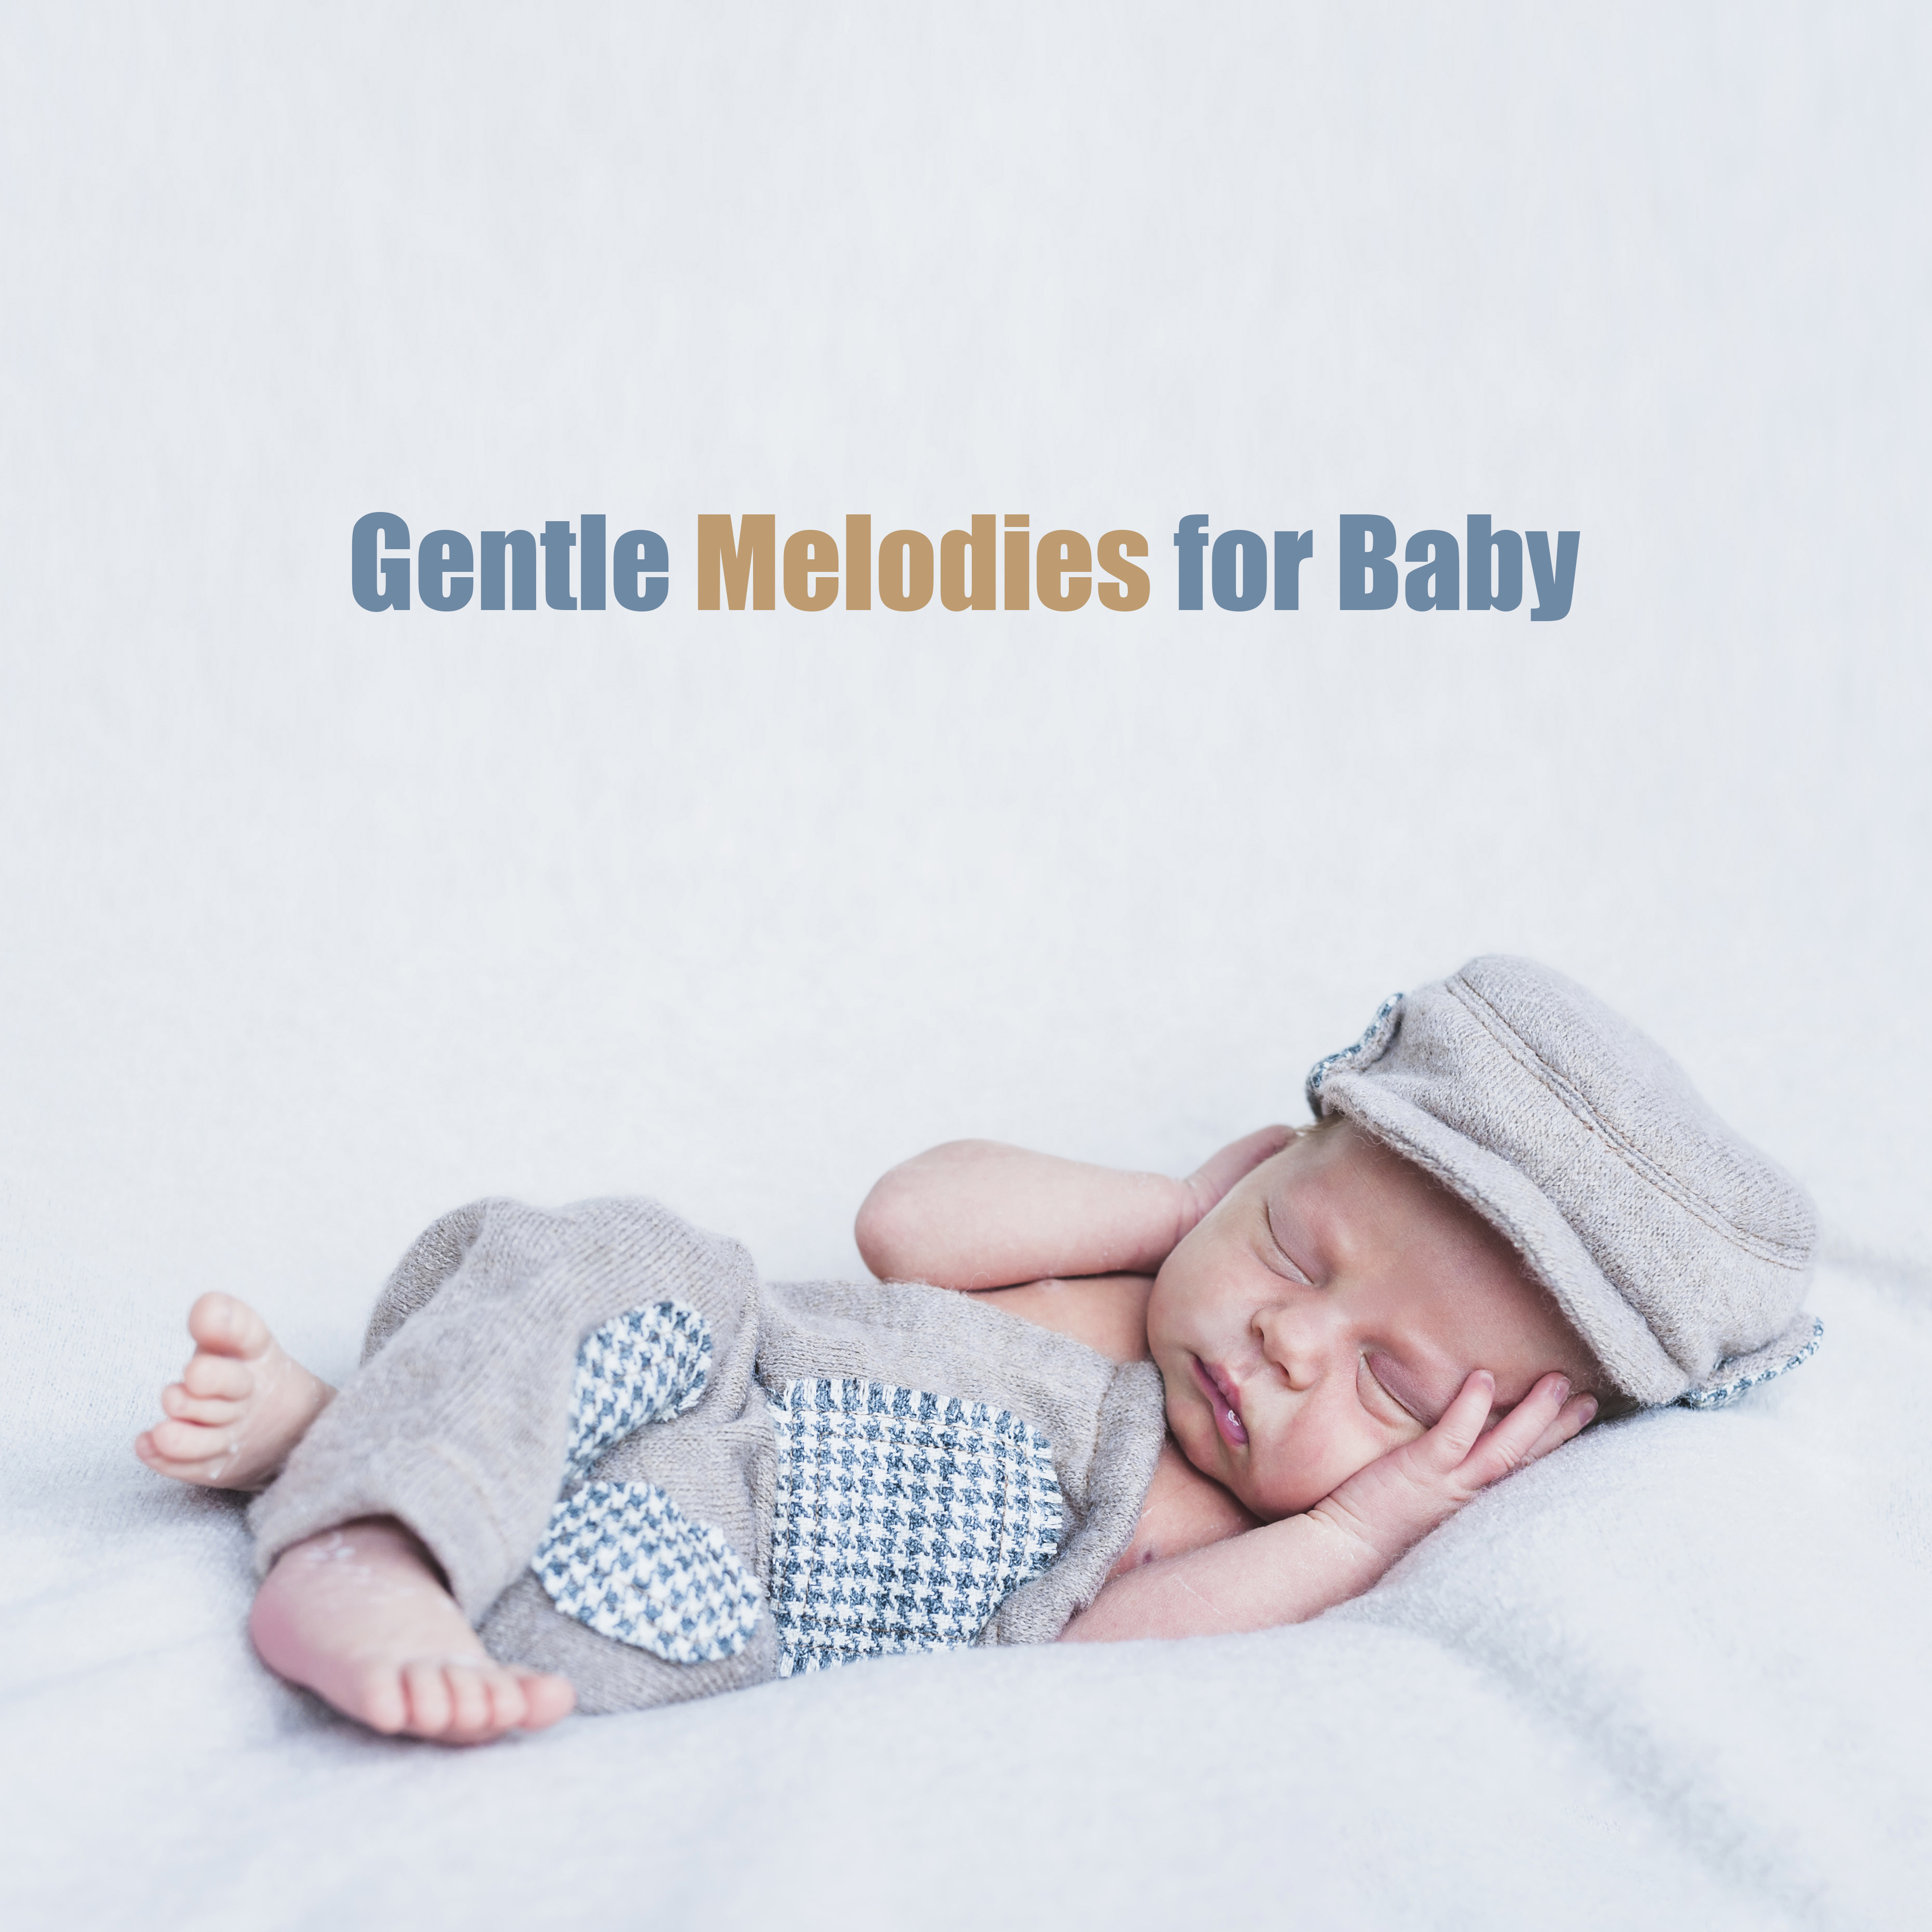 Gentle Melodies for Baby